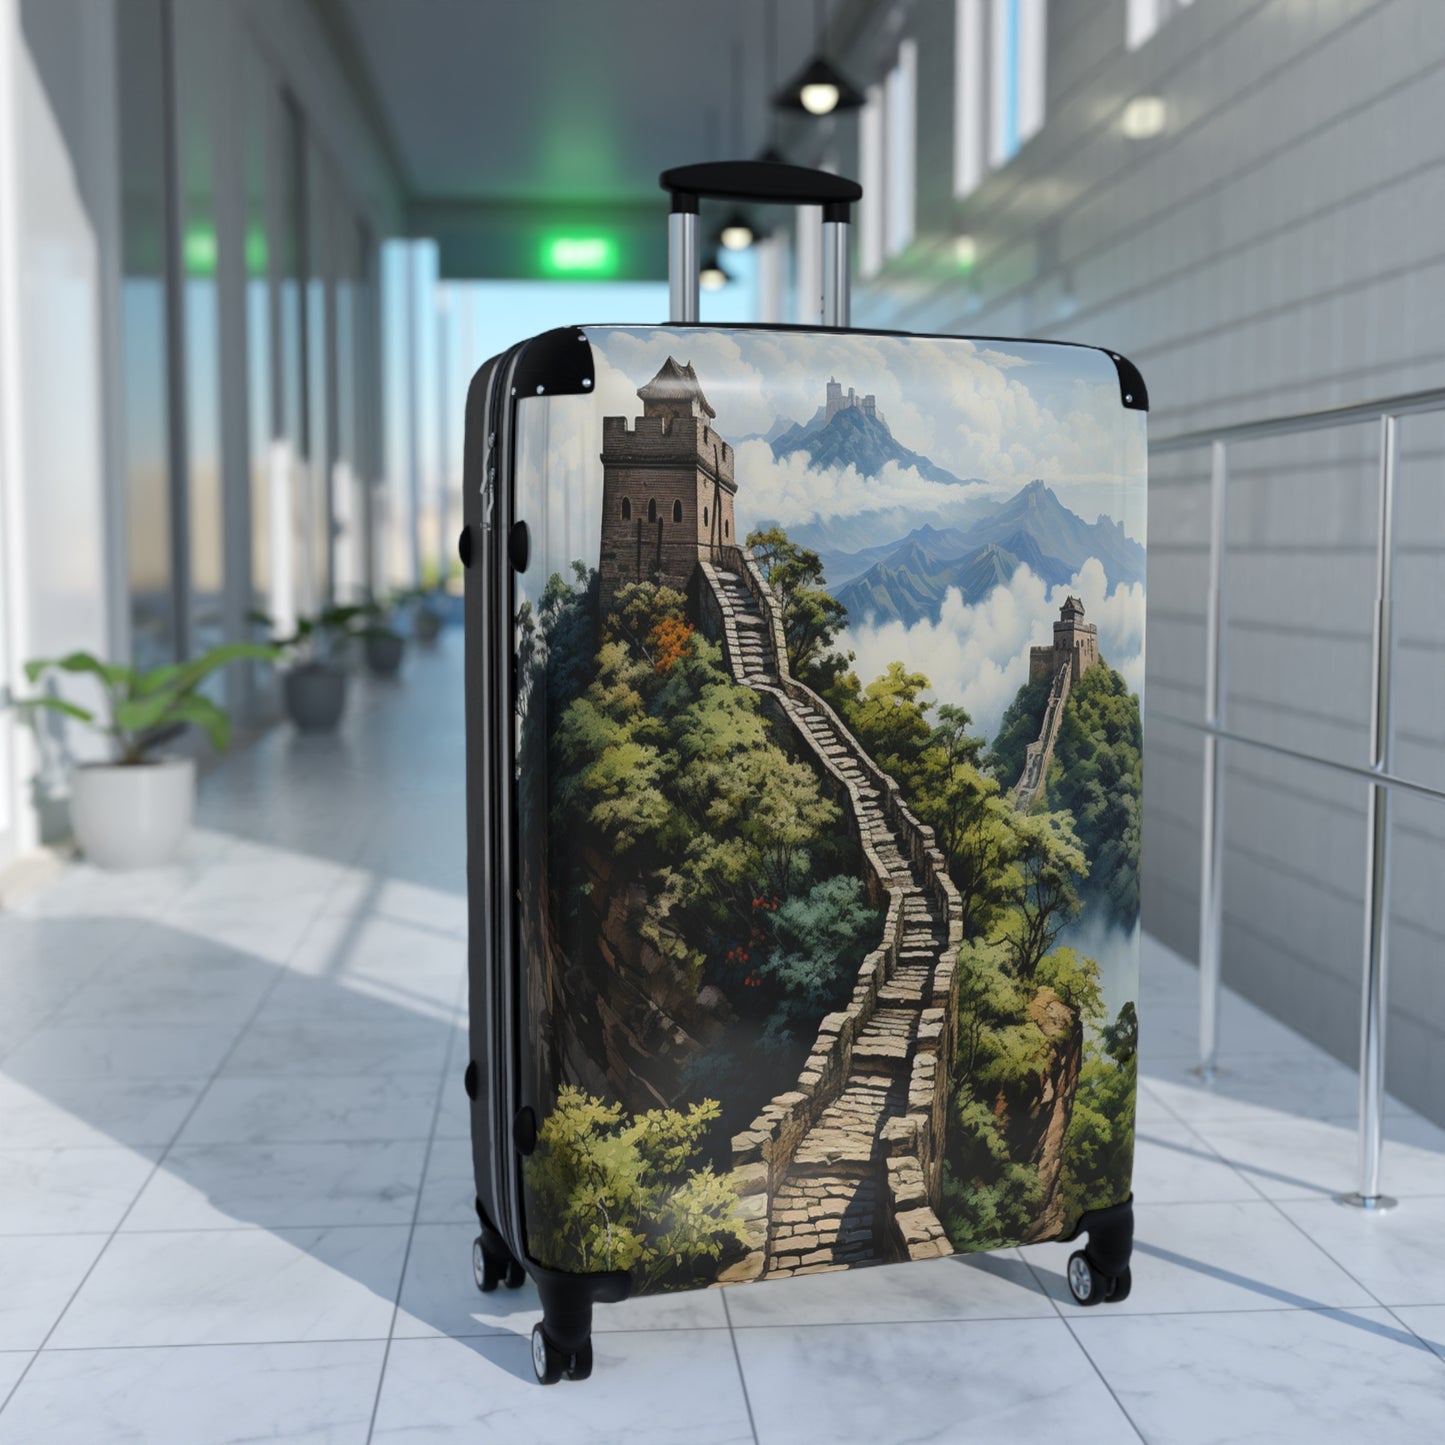 Wall of Wonders Luggage | Great Wall of China | Travel Luggage | Christmas vacation | Unique Christmas gift | Suitcase